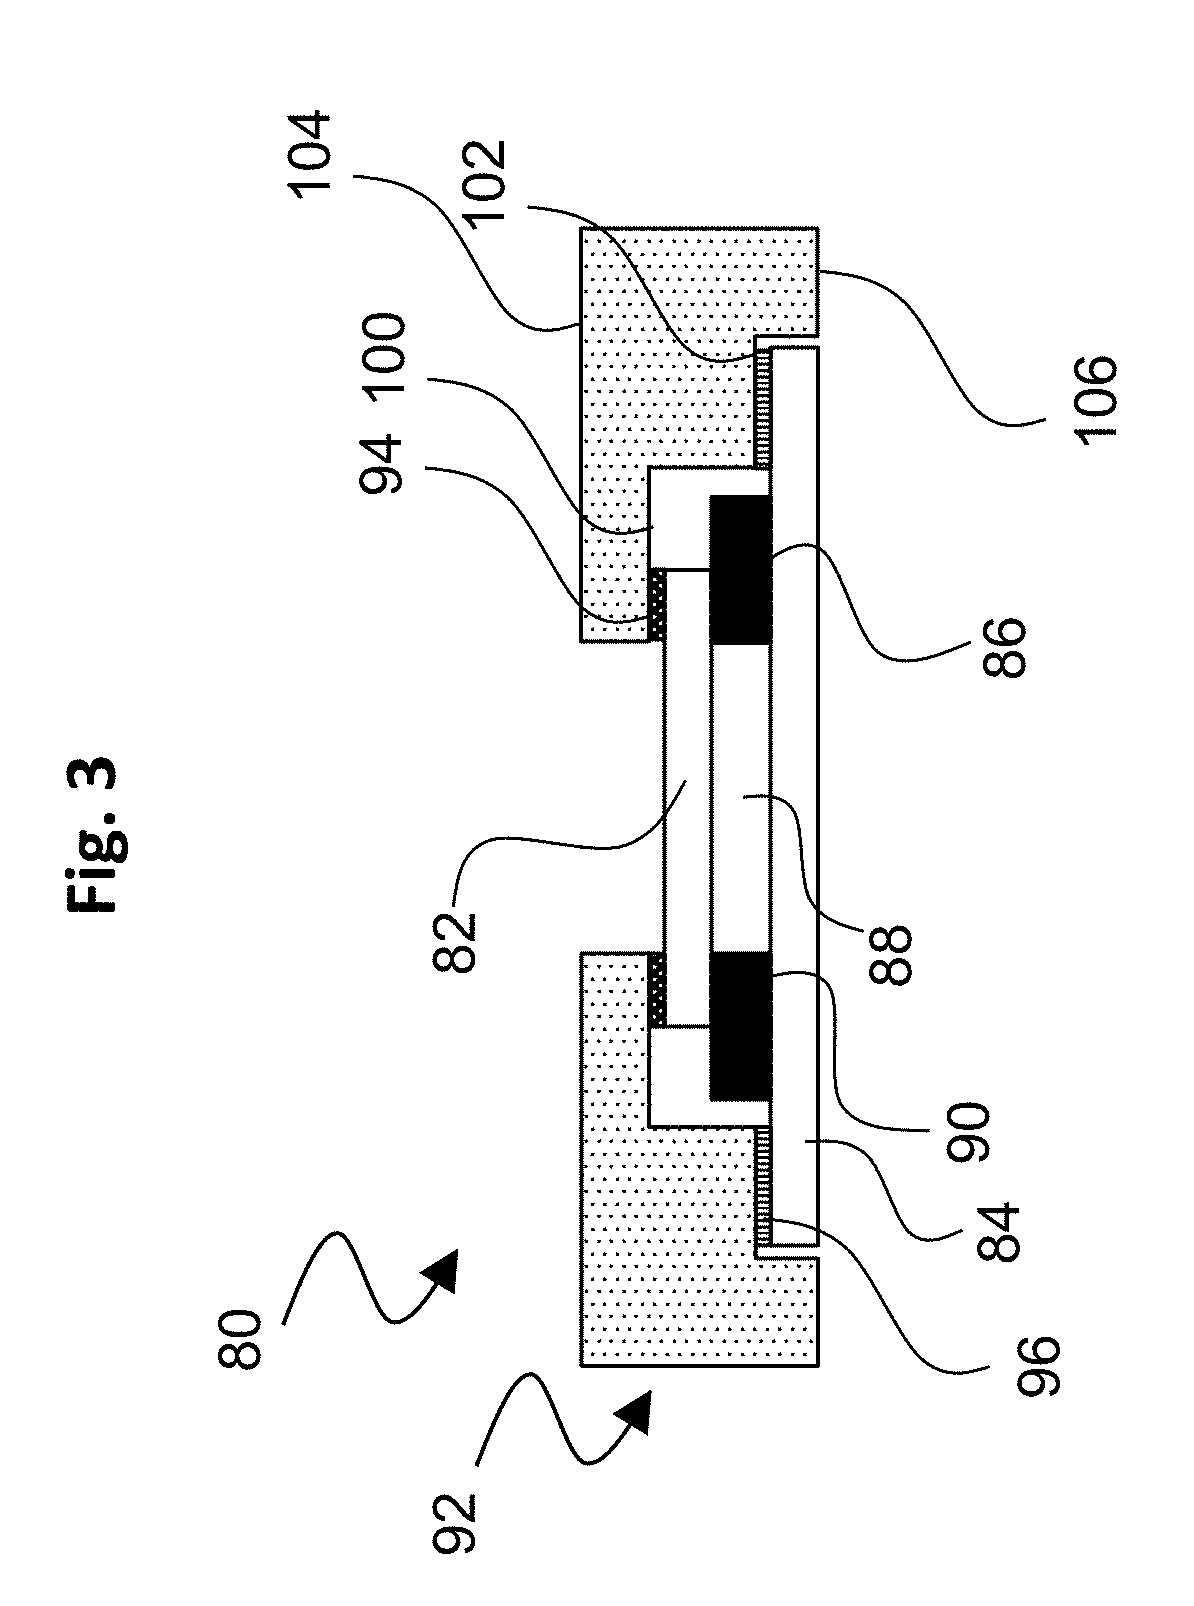 Housing for simple assembly of an ewod device